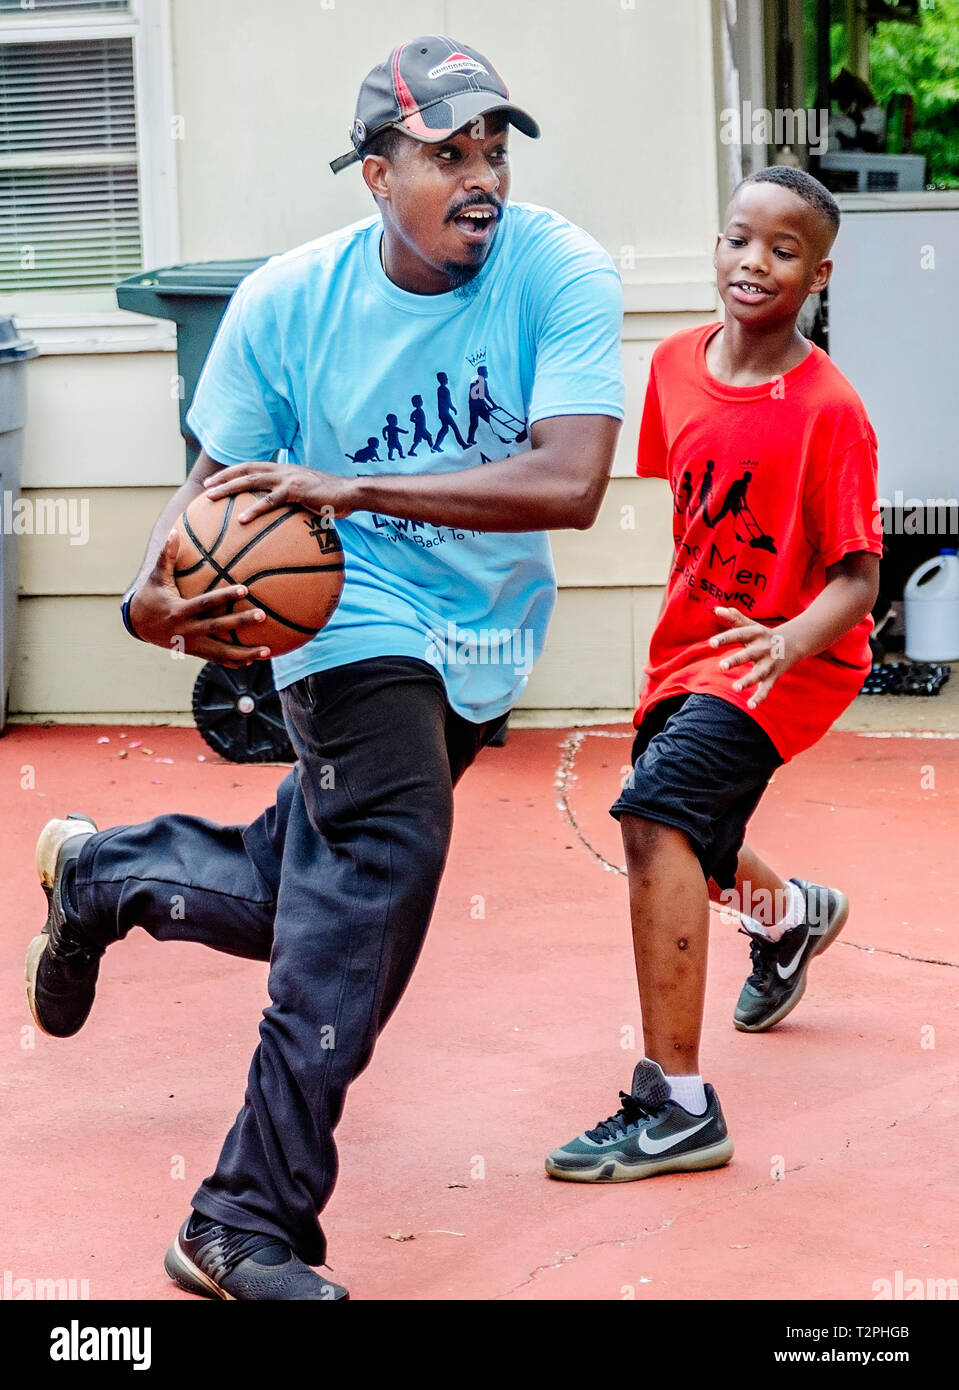 Rodney Smith Jr. dribbles a basketball as Quay Knight watches, Aug. 1, 2018, in Huntsville, Alabama. Stock Photo